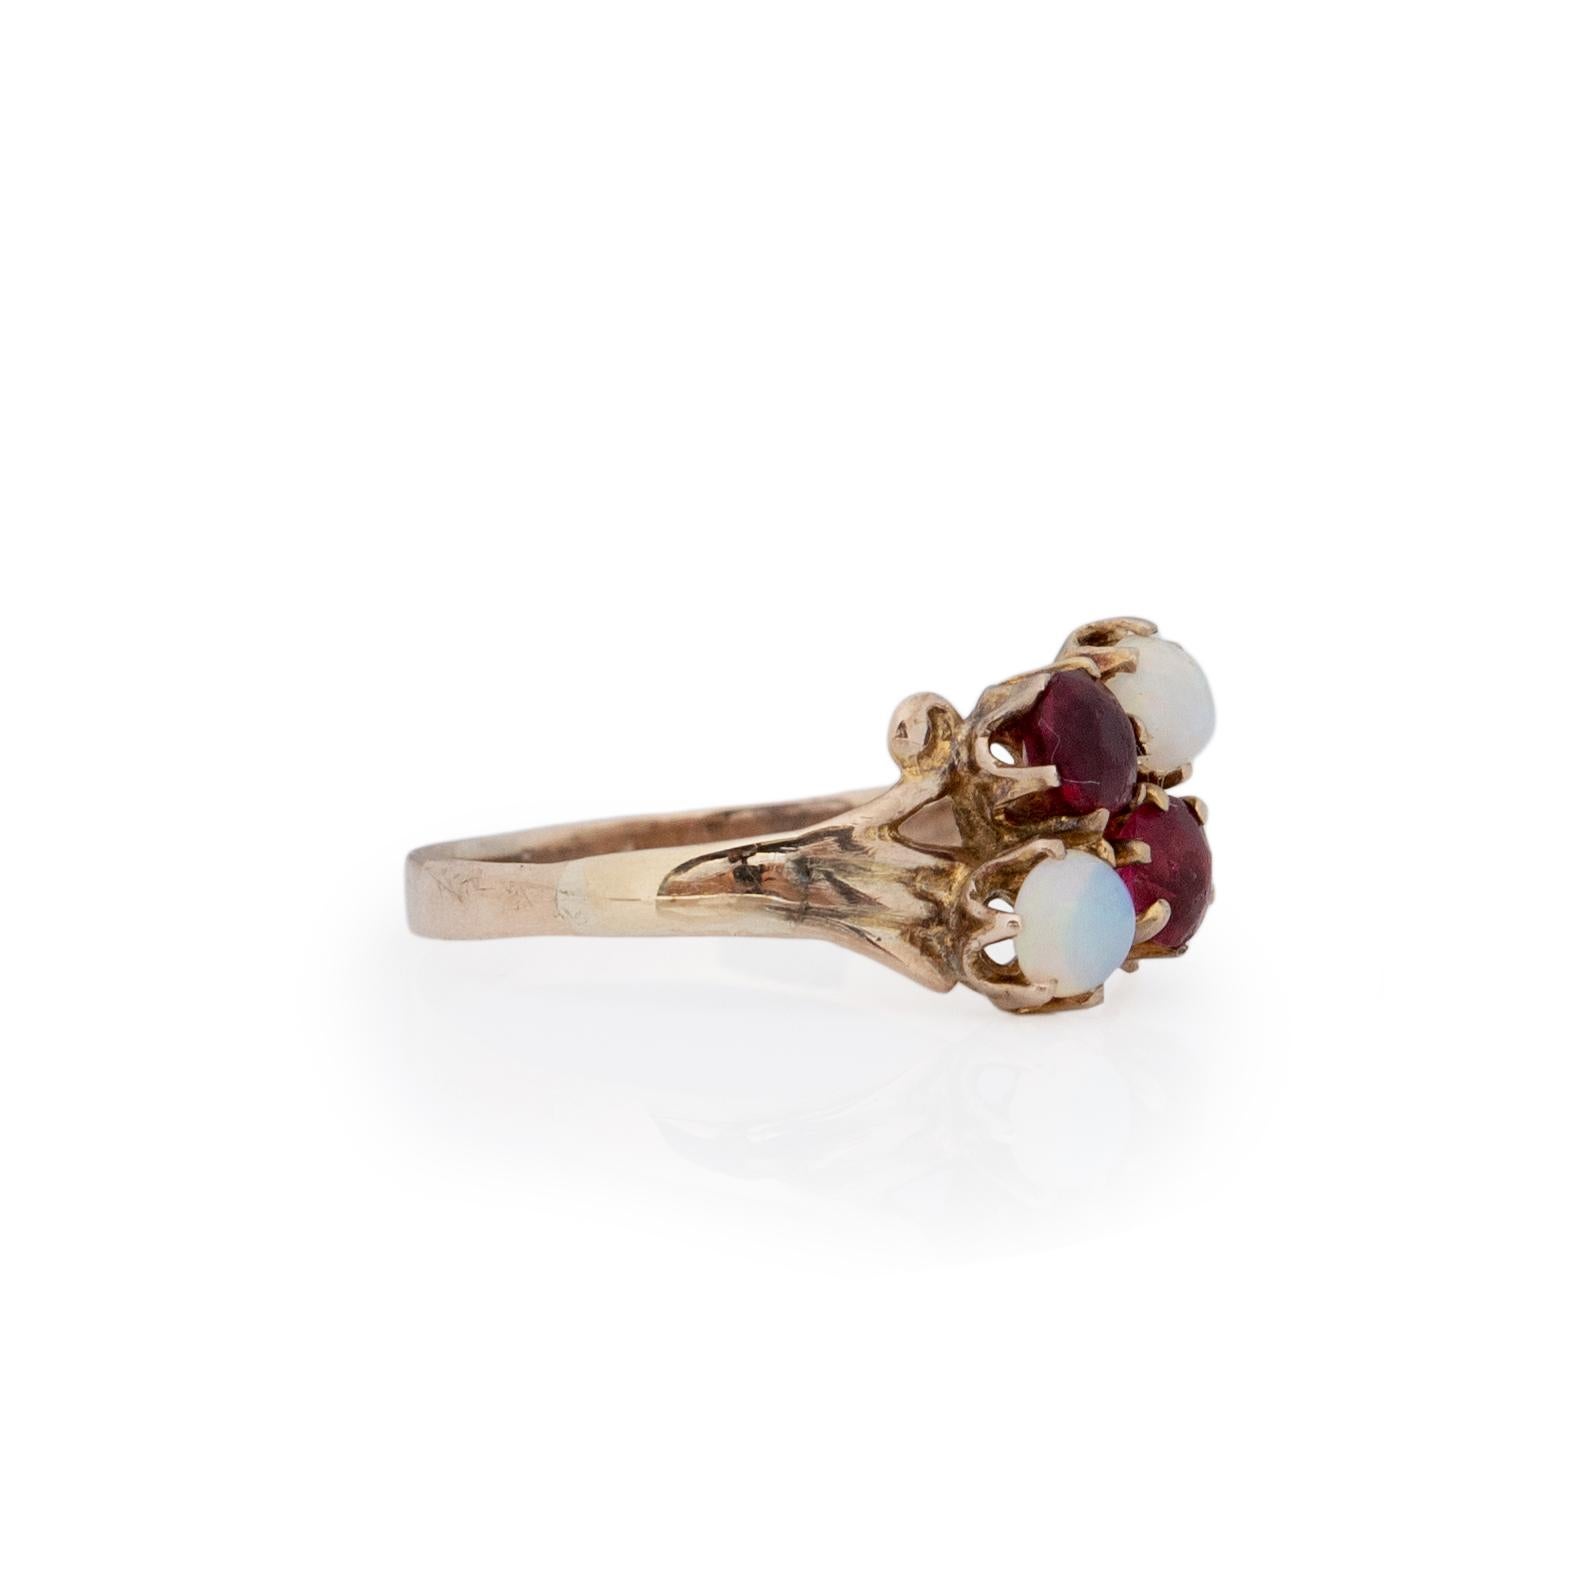 This antique Victorian treasure is crafted in 10K yellow gold. The split shank design is nearly a bypass design, in the center of the split shanks are two old cut garnet pieces and two opal cabochons. The delicate carved shanks are the perfect